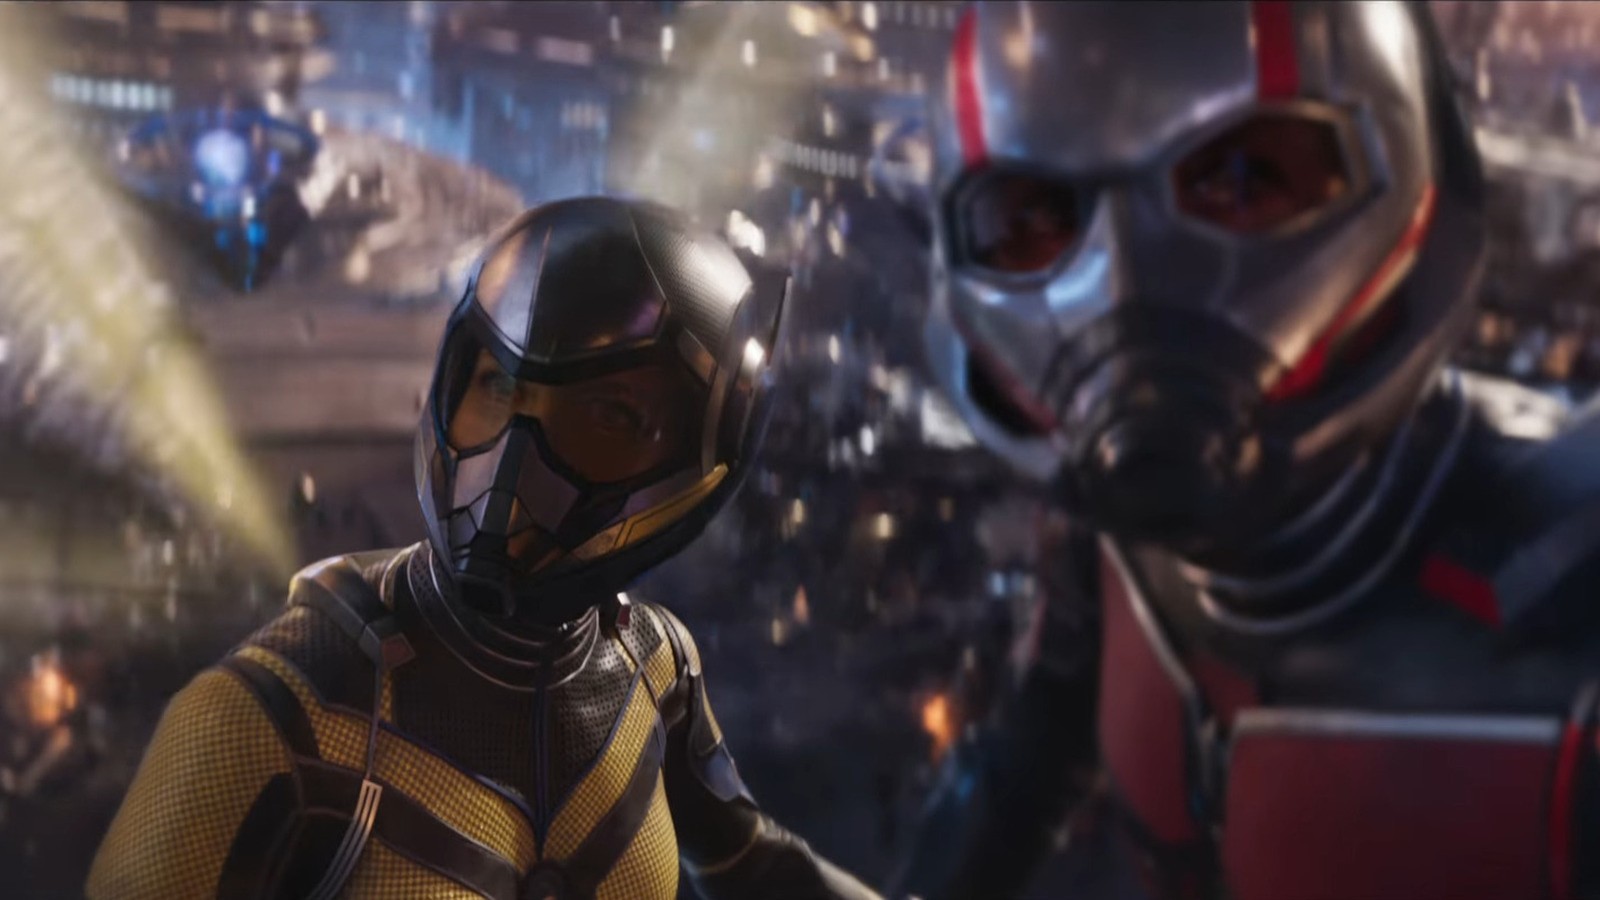 Antman and the wasp: Quantumania (2023). Could anyone make it a